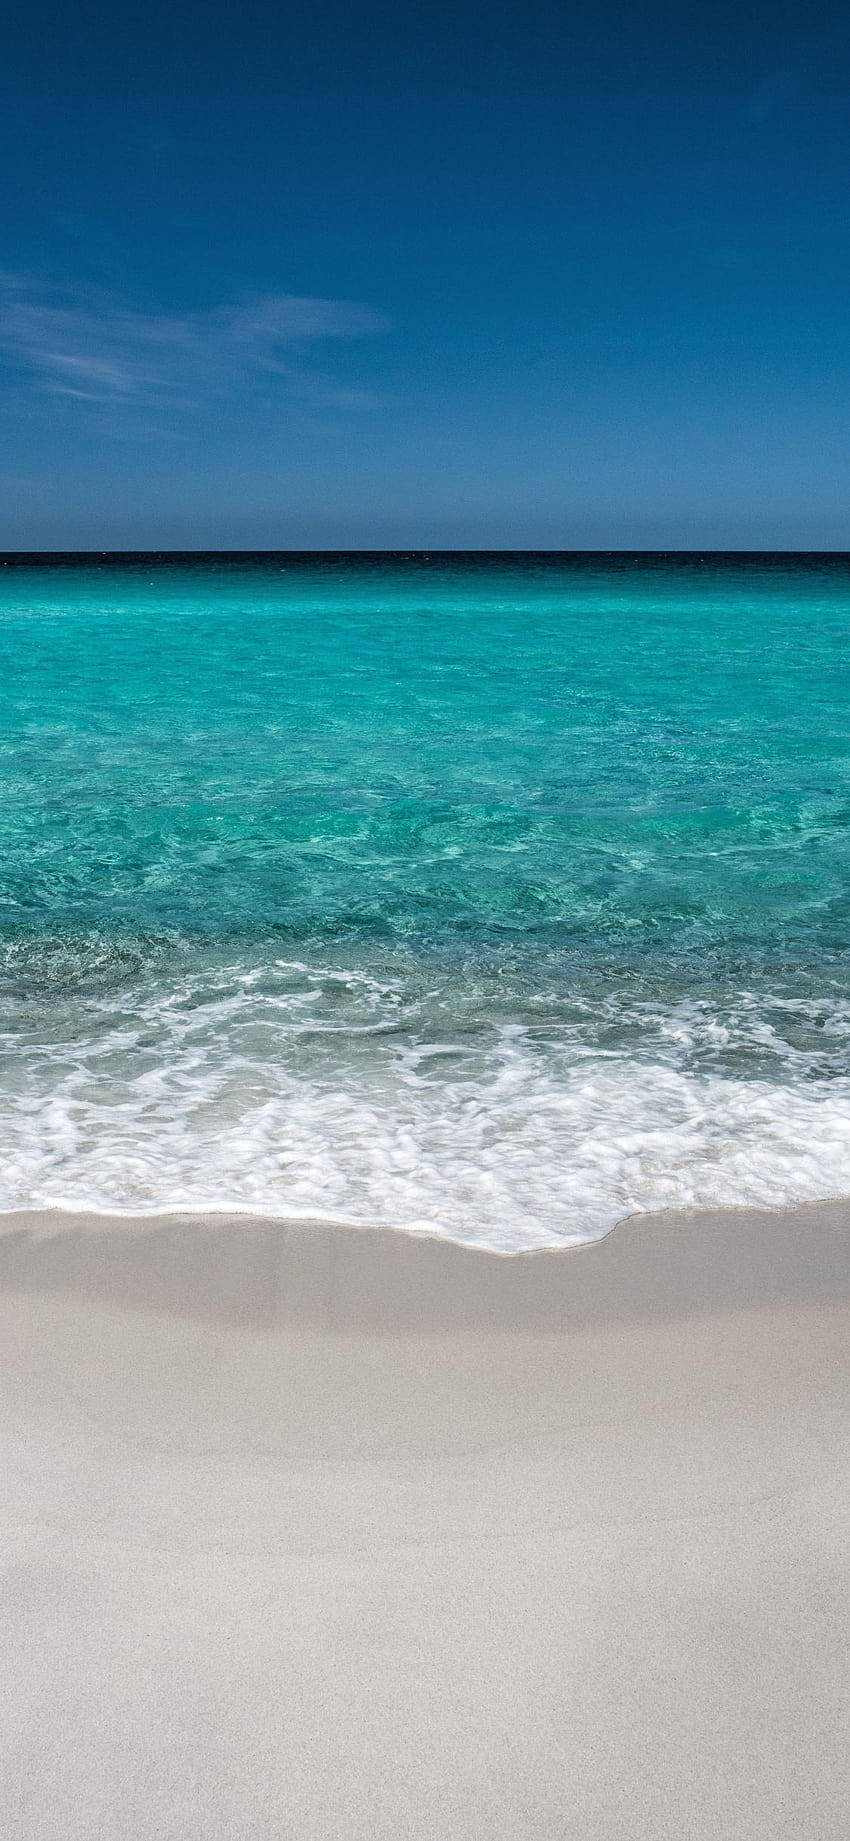 Iphone X Beach And Open Sea Background